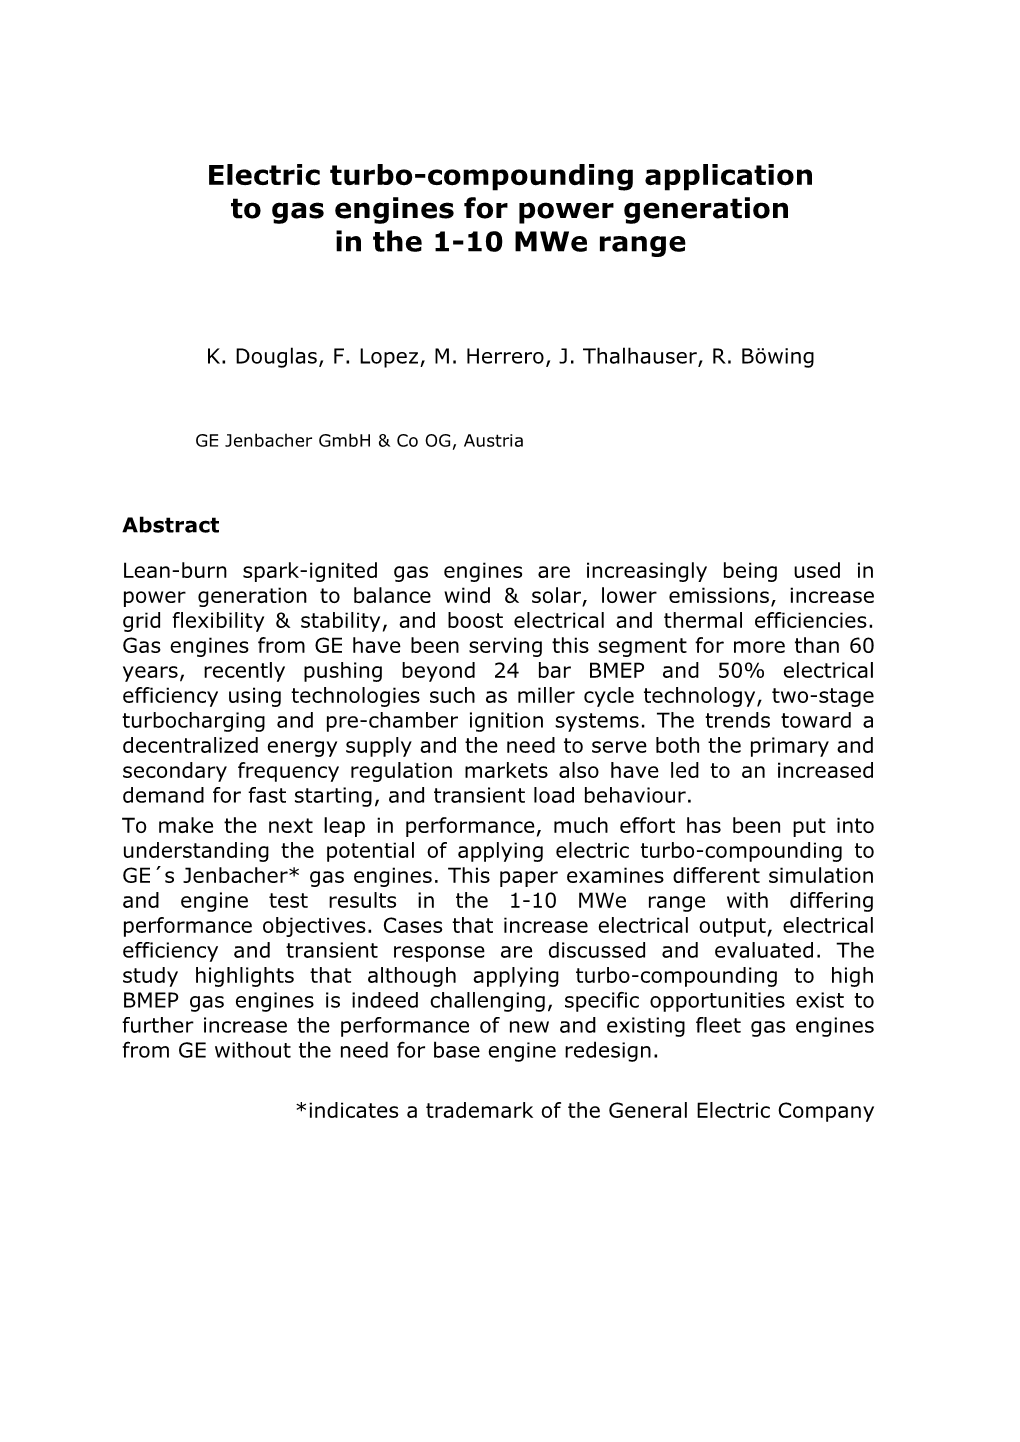 Electric Turbo-Compounding Application to Gas Engines for Power Generation in the 1-10 Mwe Range